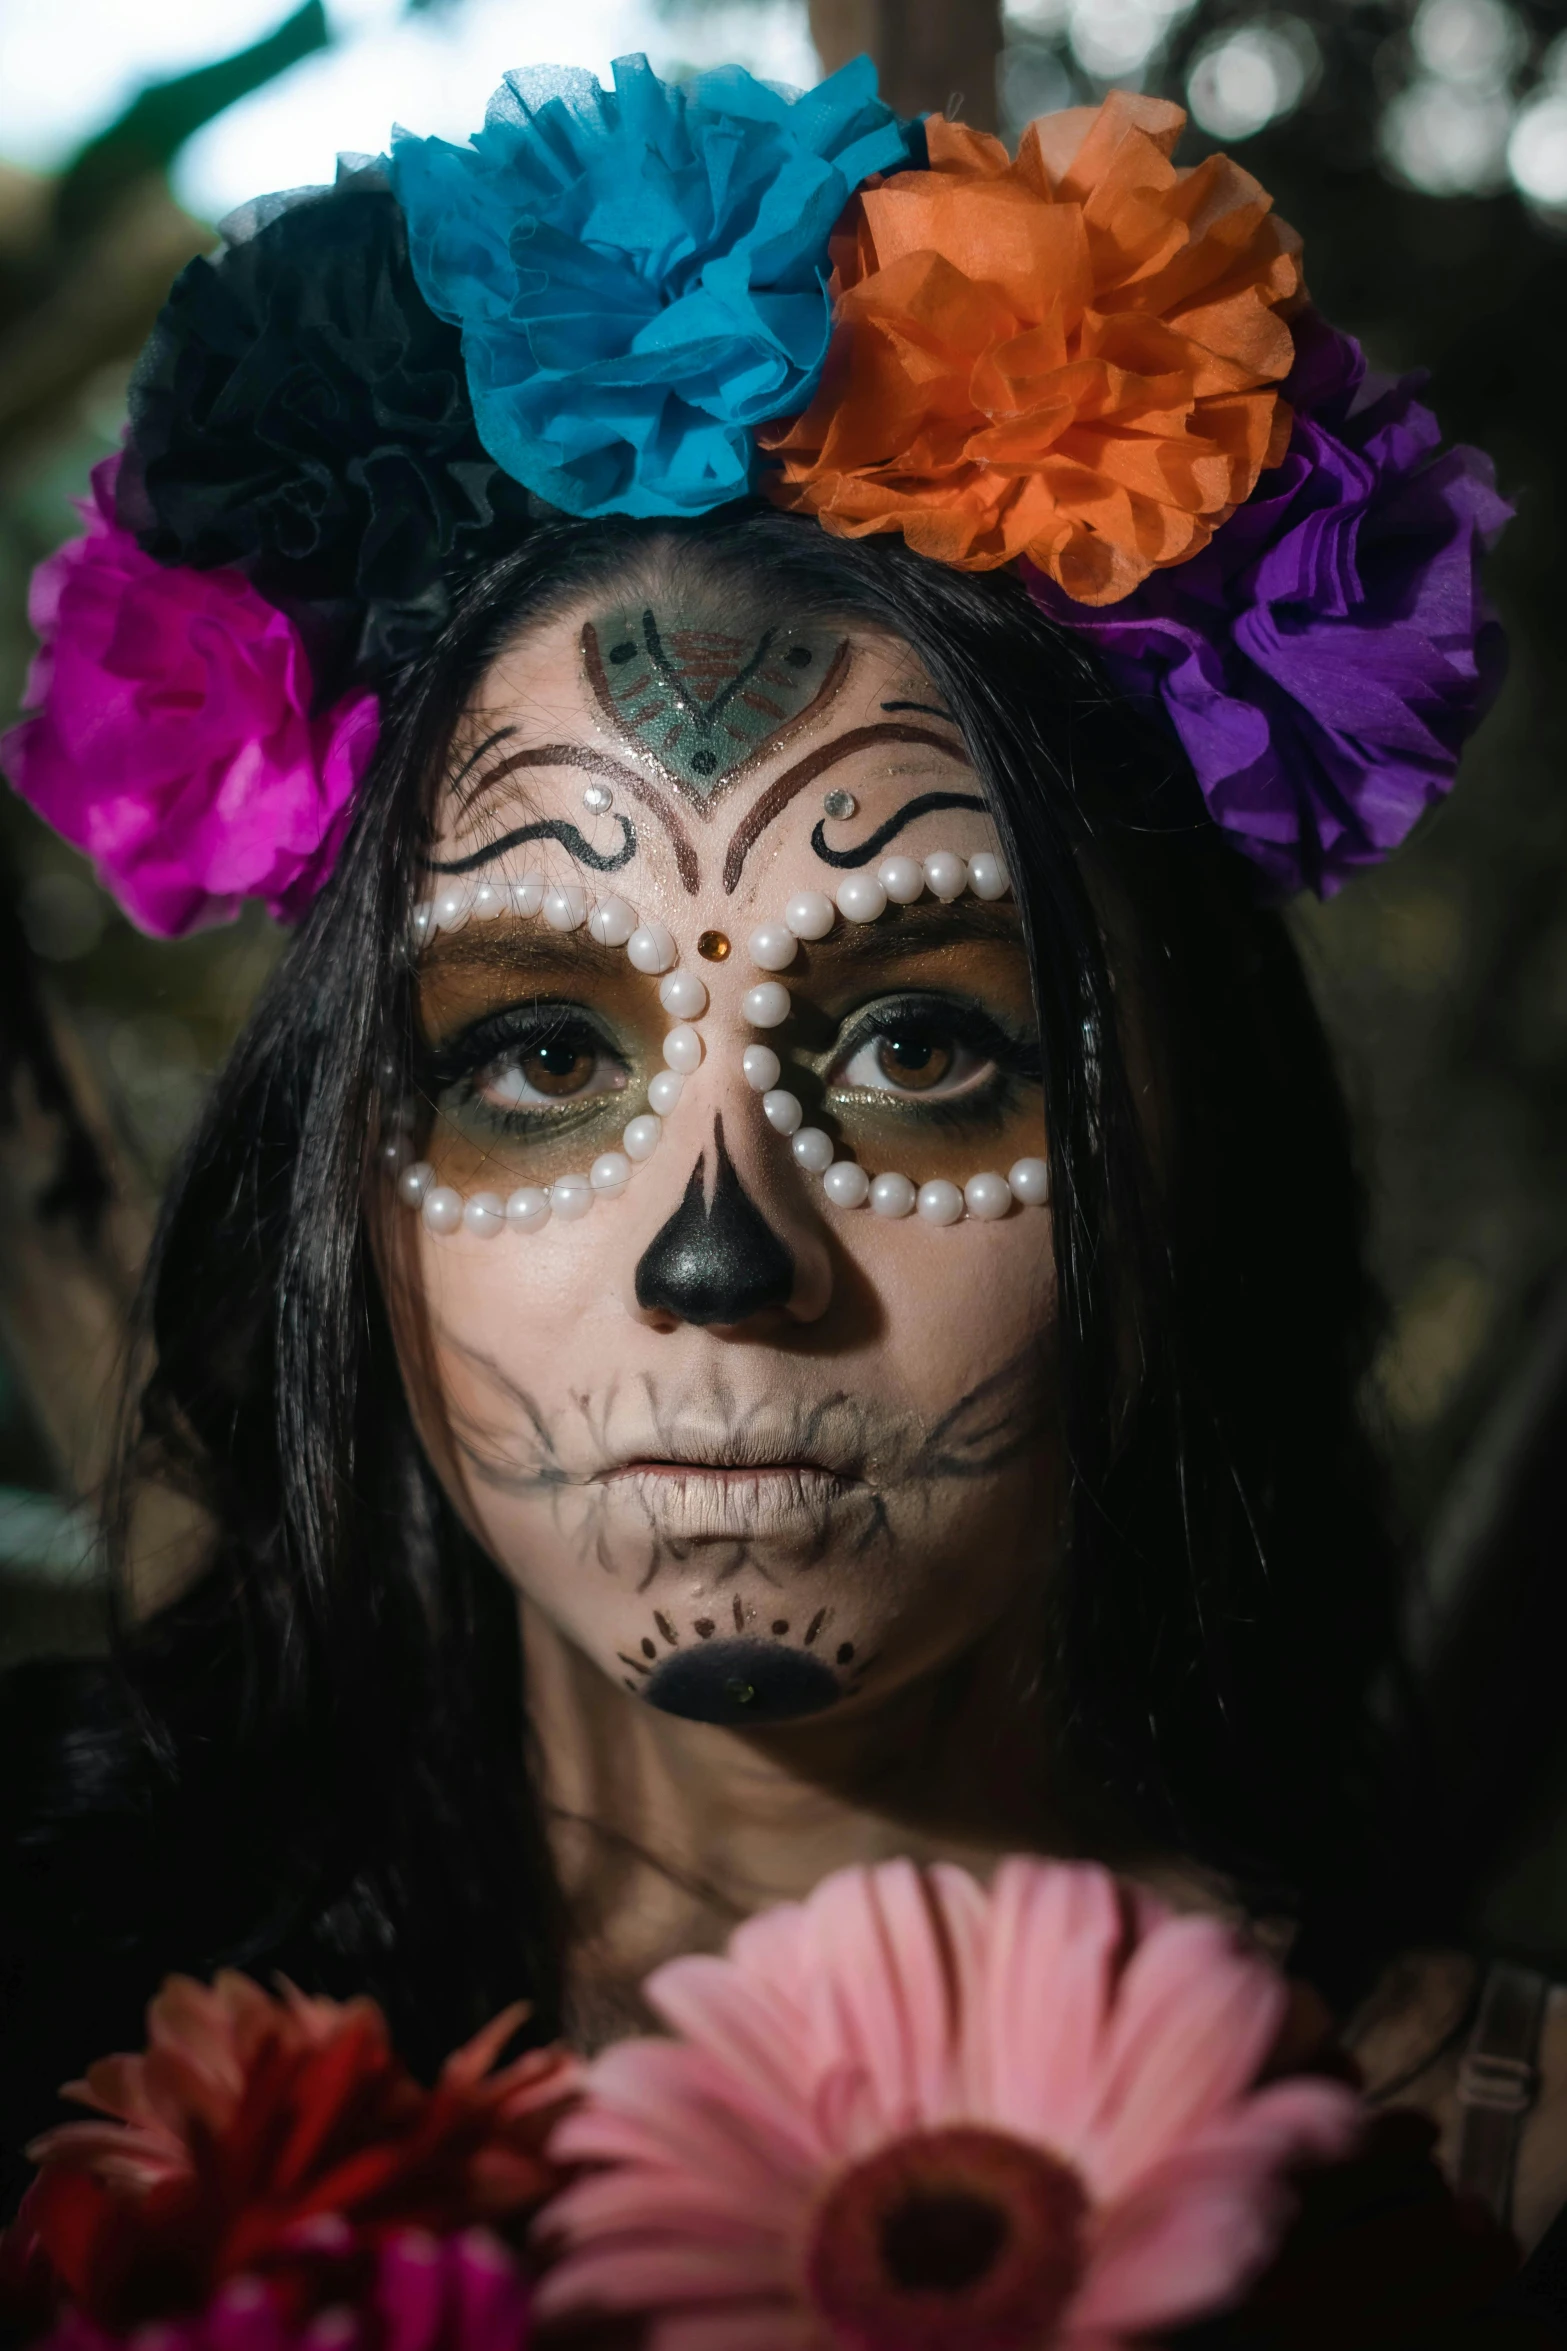 a young woman with makeup and face art